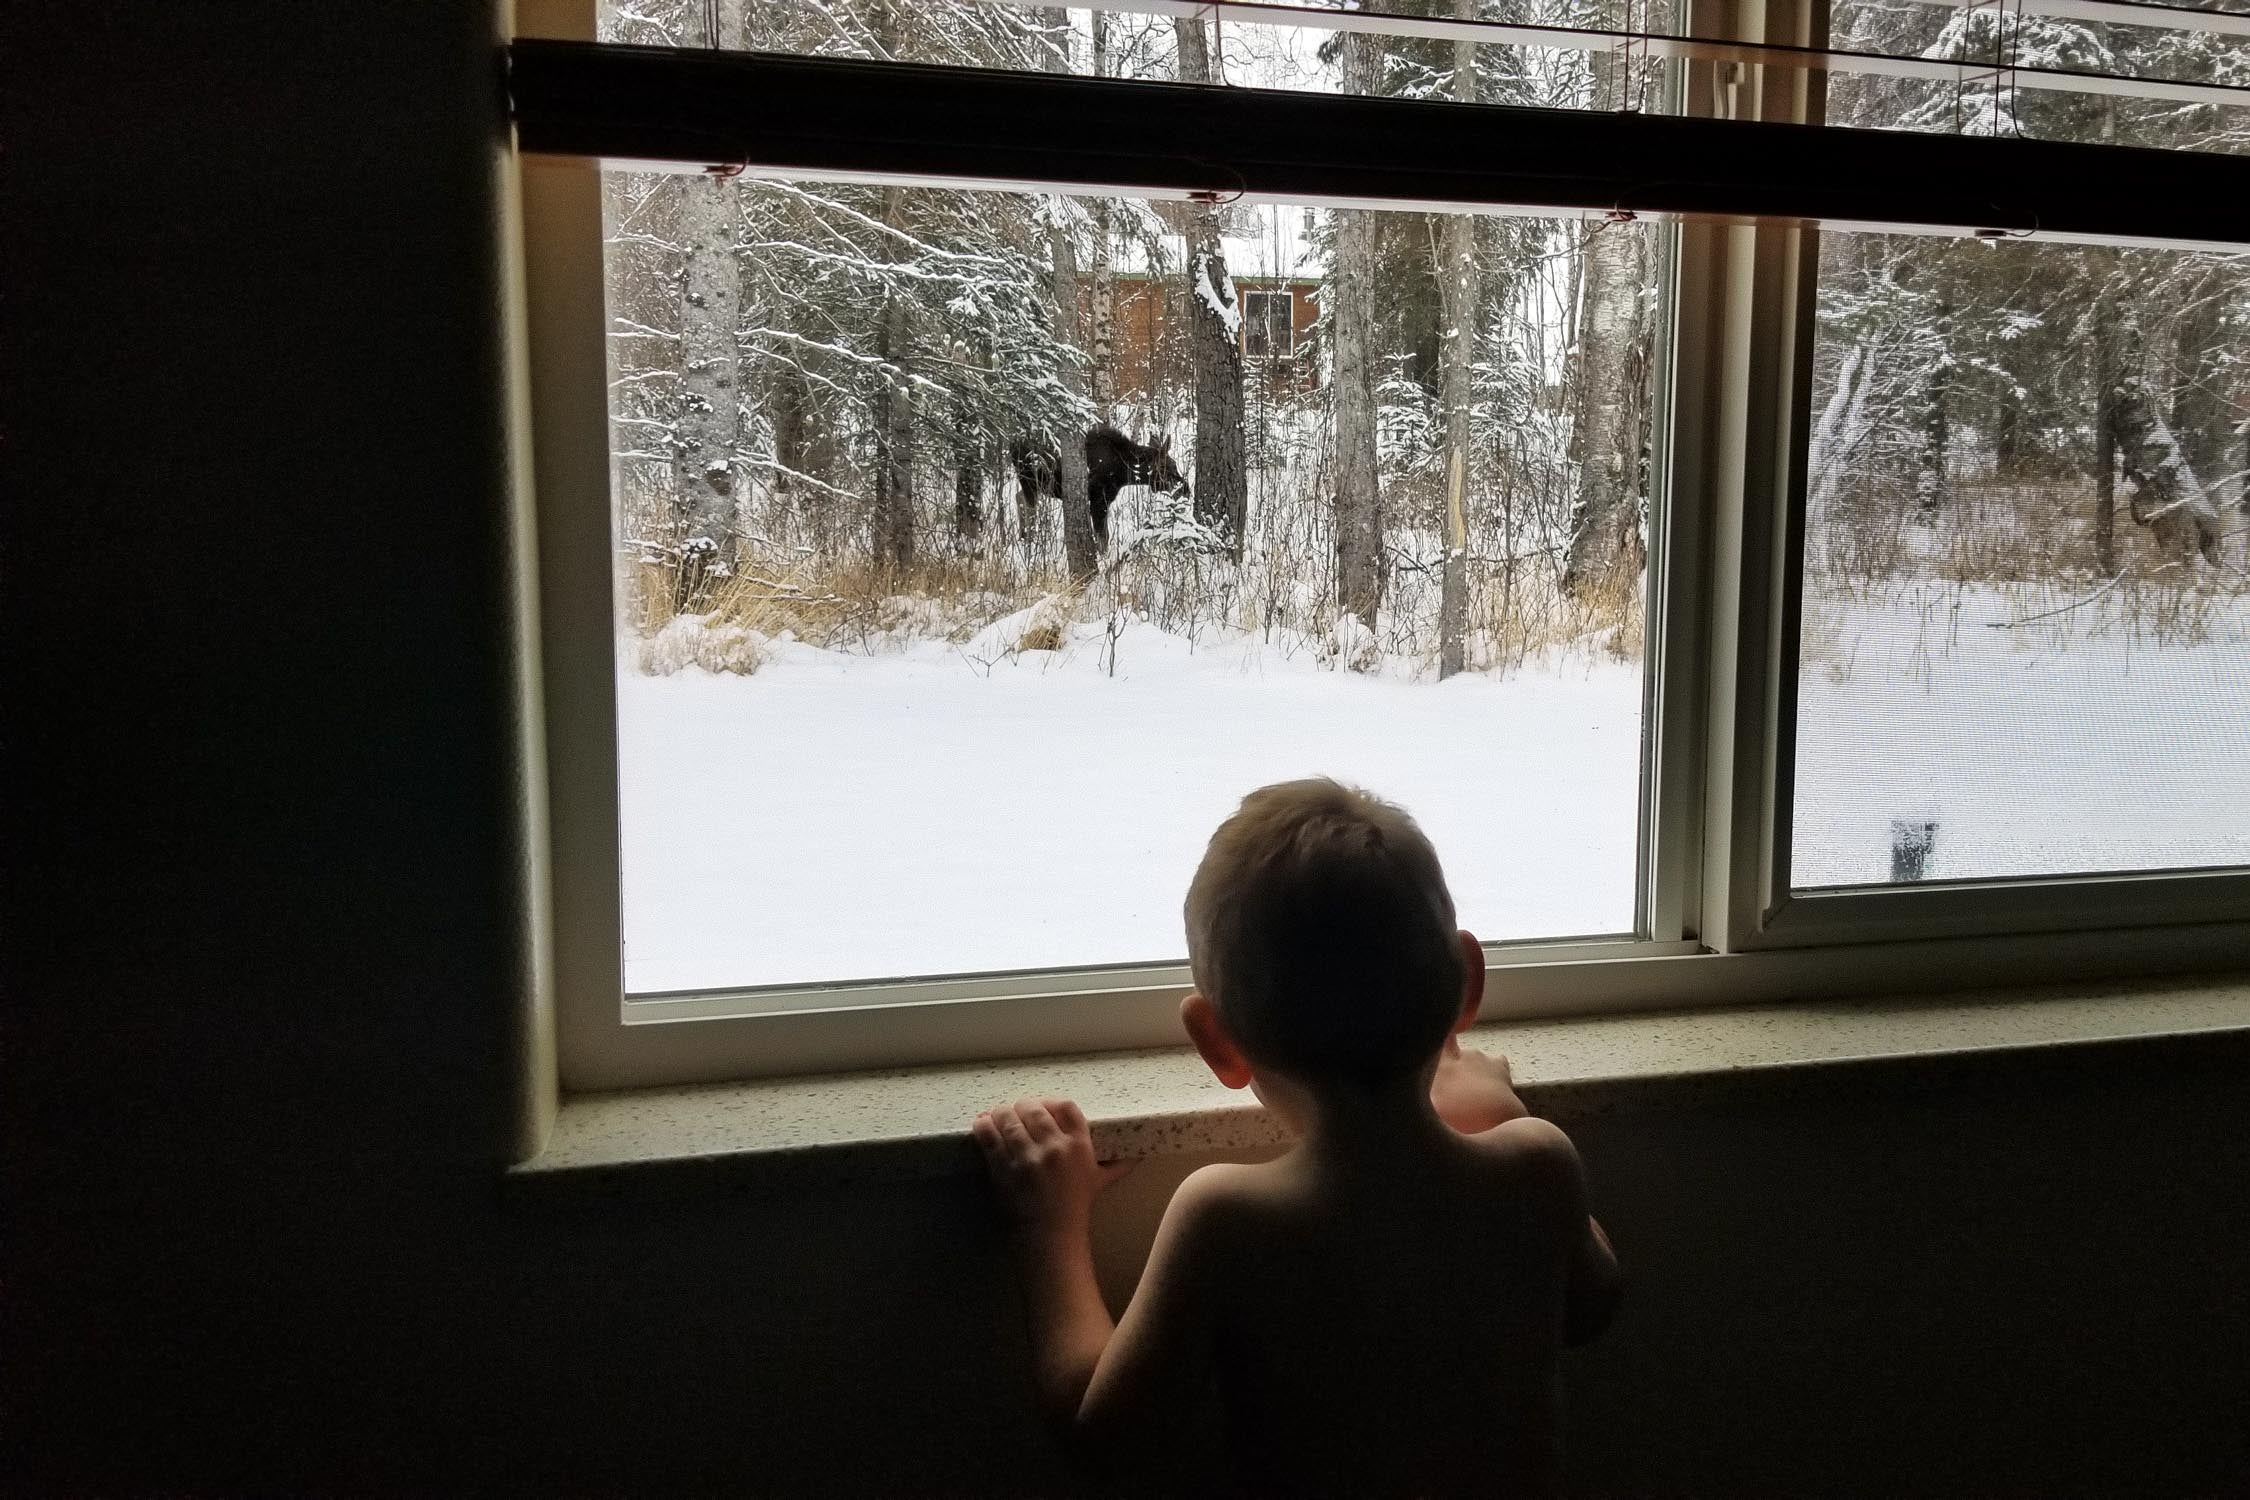 Young child looking out of window at an animal in the distance.